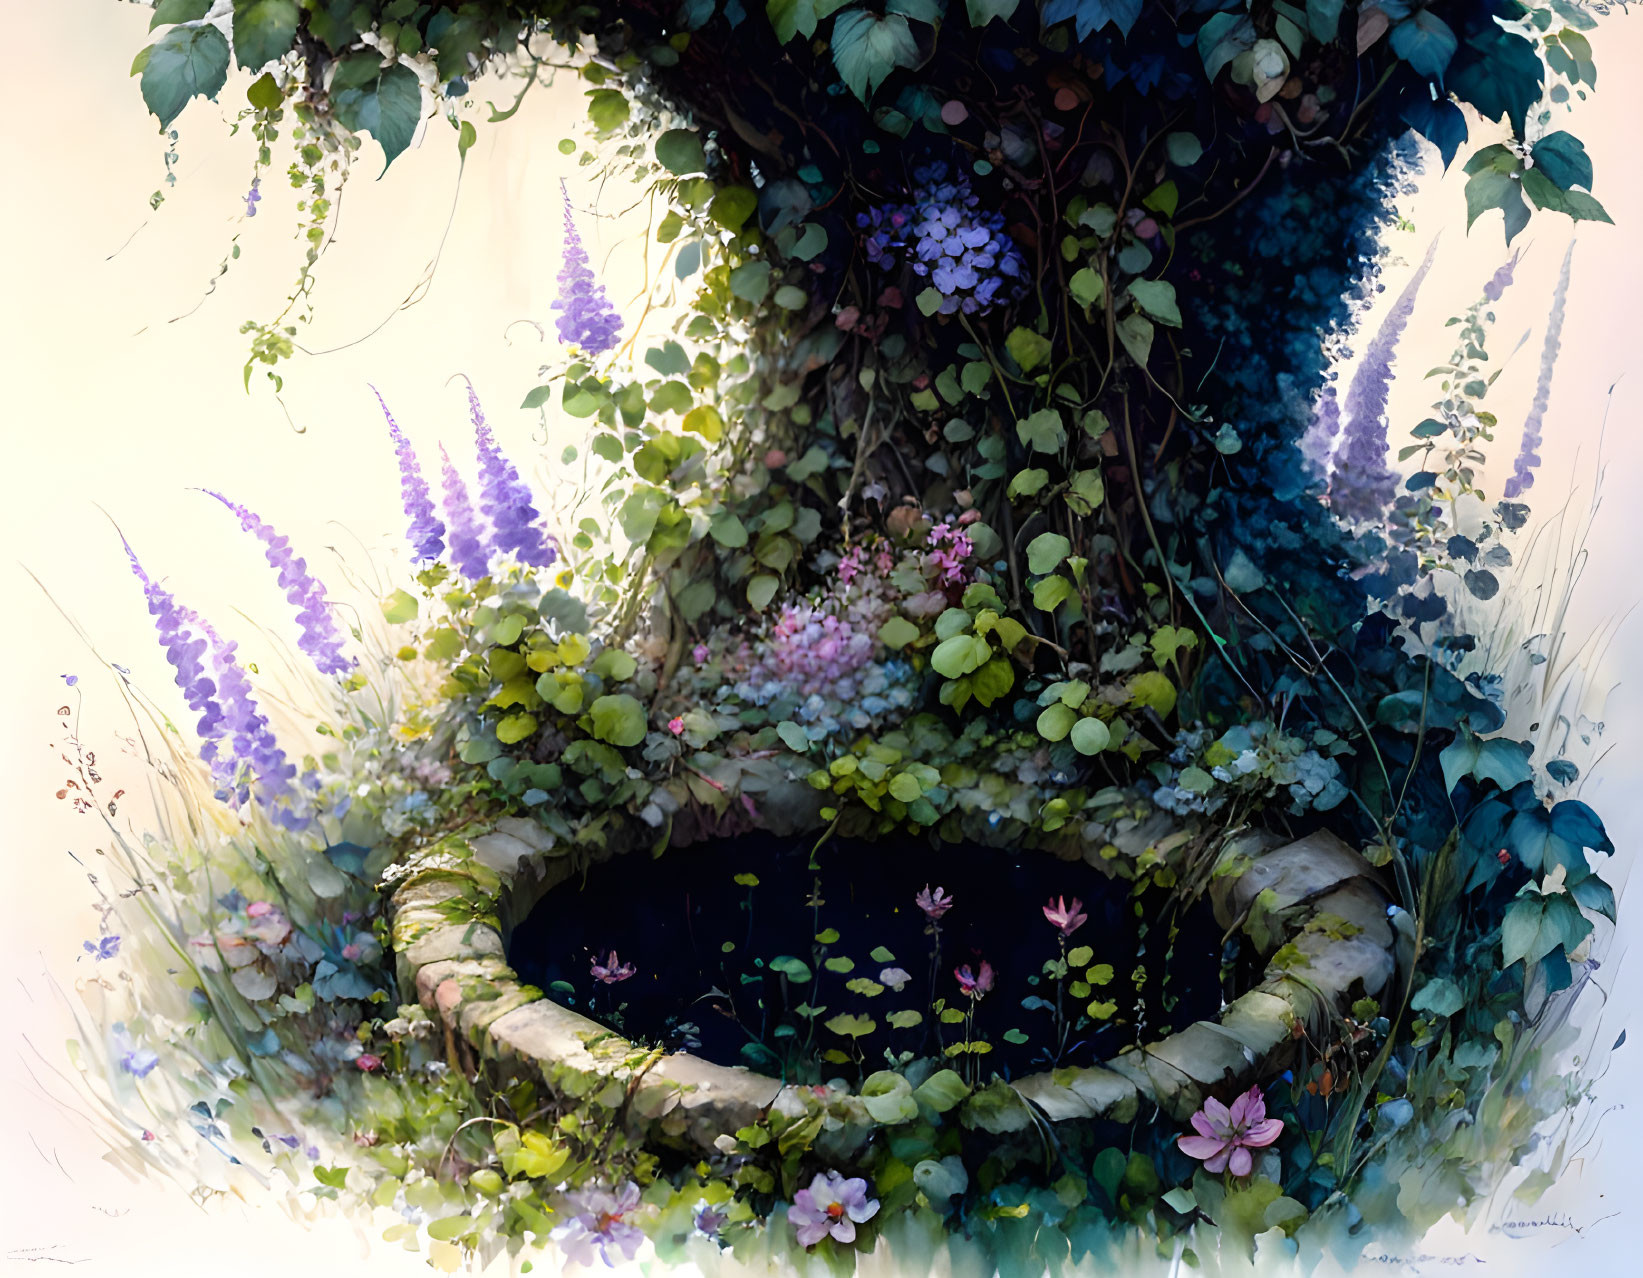 Illustration of Old Stone Well Surrounded by Greenery and Flowers